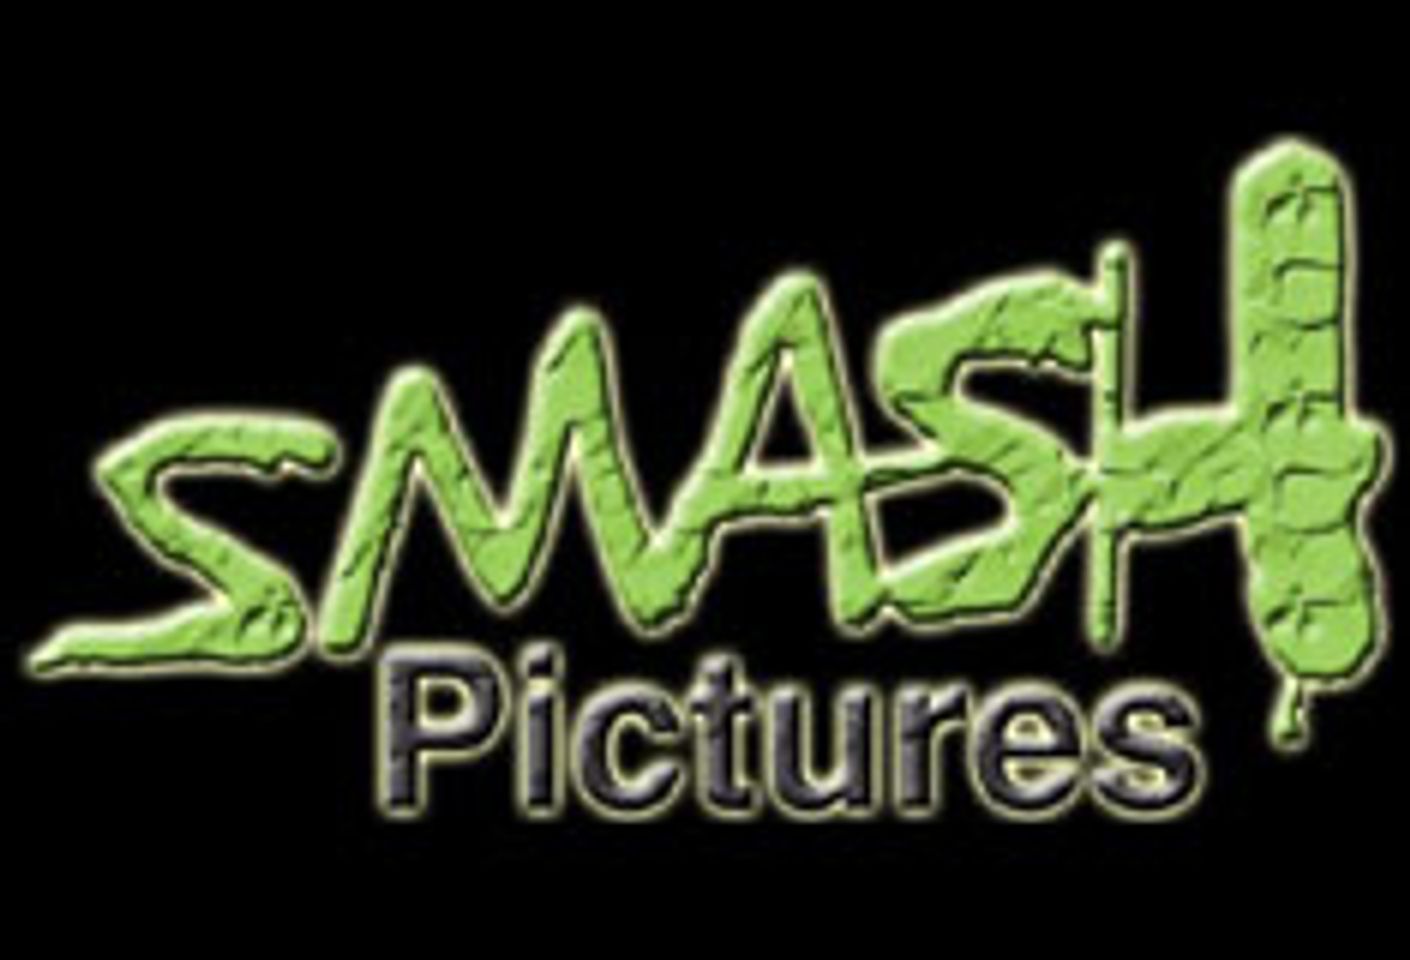 Jeff Kydd Named Director of Publicity for Smash Pictures